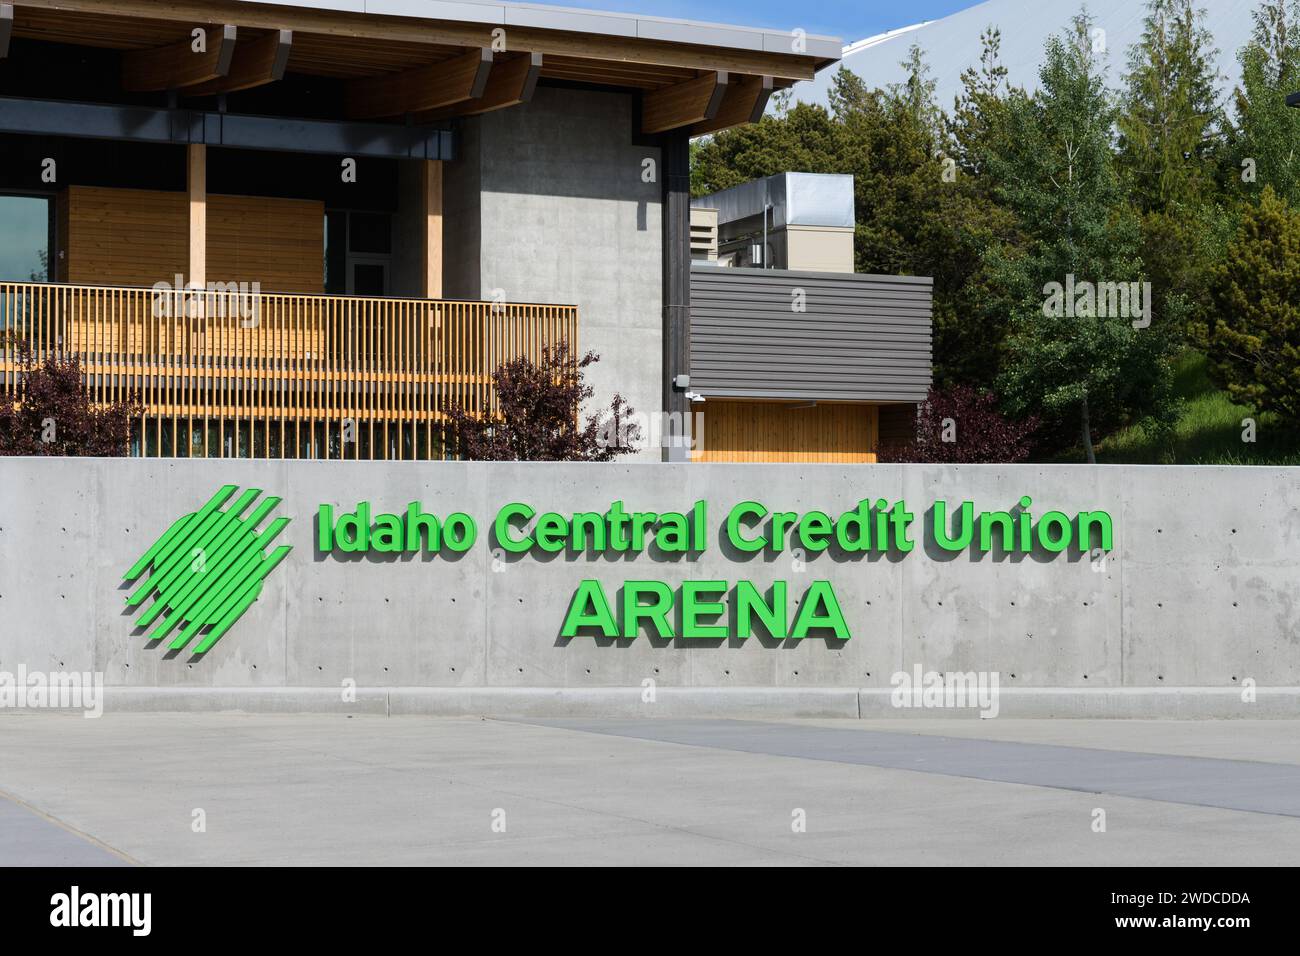 Moscow, ID, USA - May 23, 2023; Sign for Idaho Central Credit Union Arena at University of Idaho Stock Photo